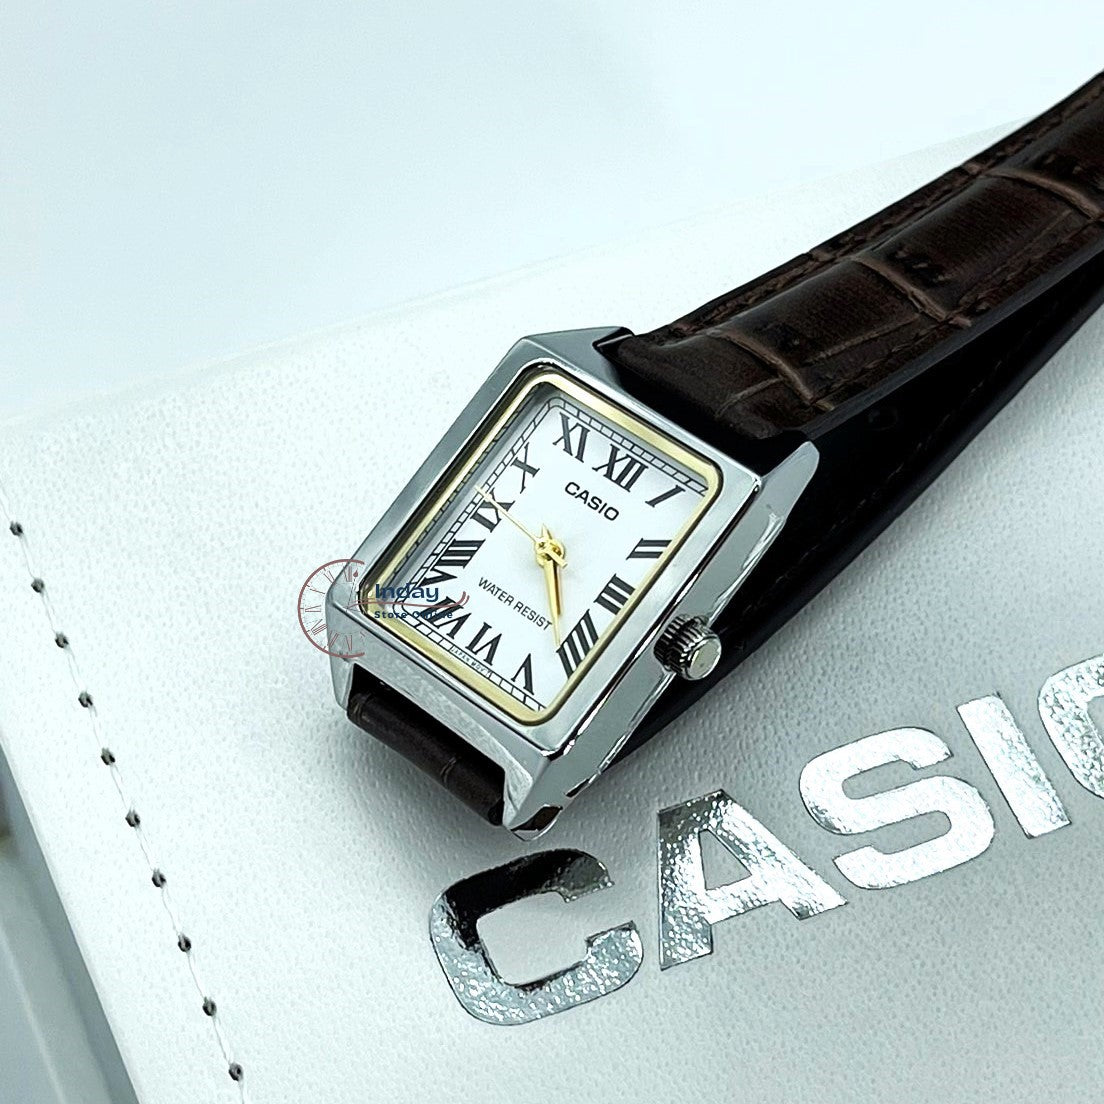 Casio Women's Watch LTP-V007L-7B2 Analog Leather Band Water Resistant Mineral Glass